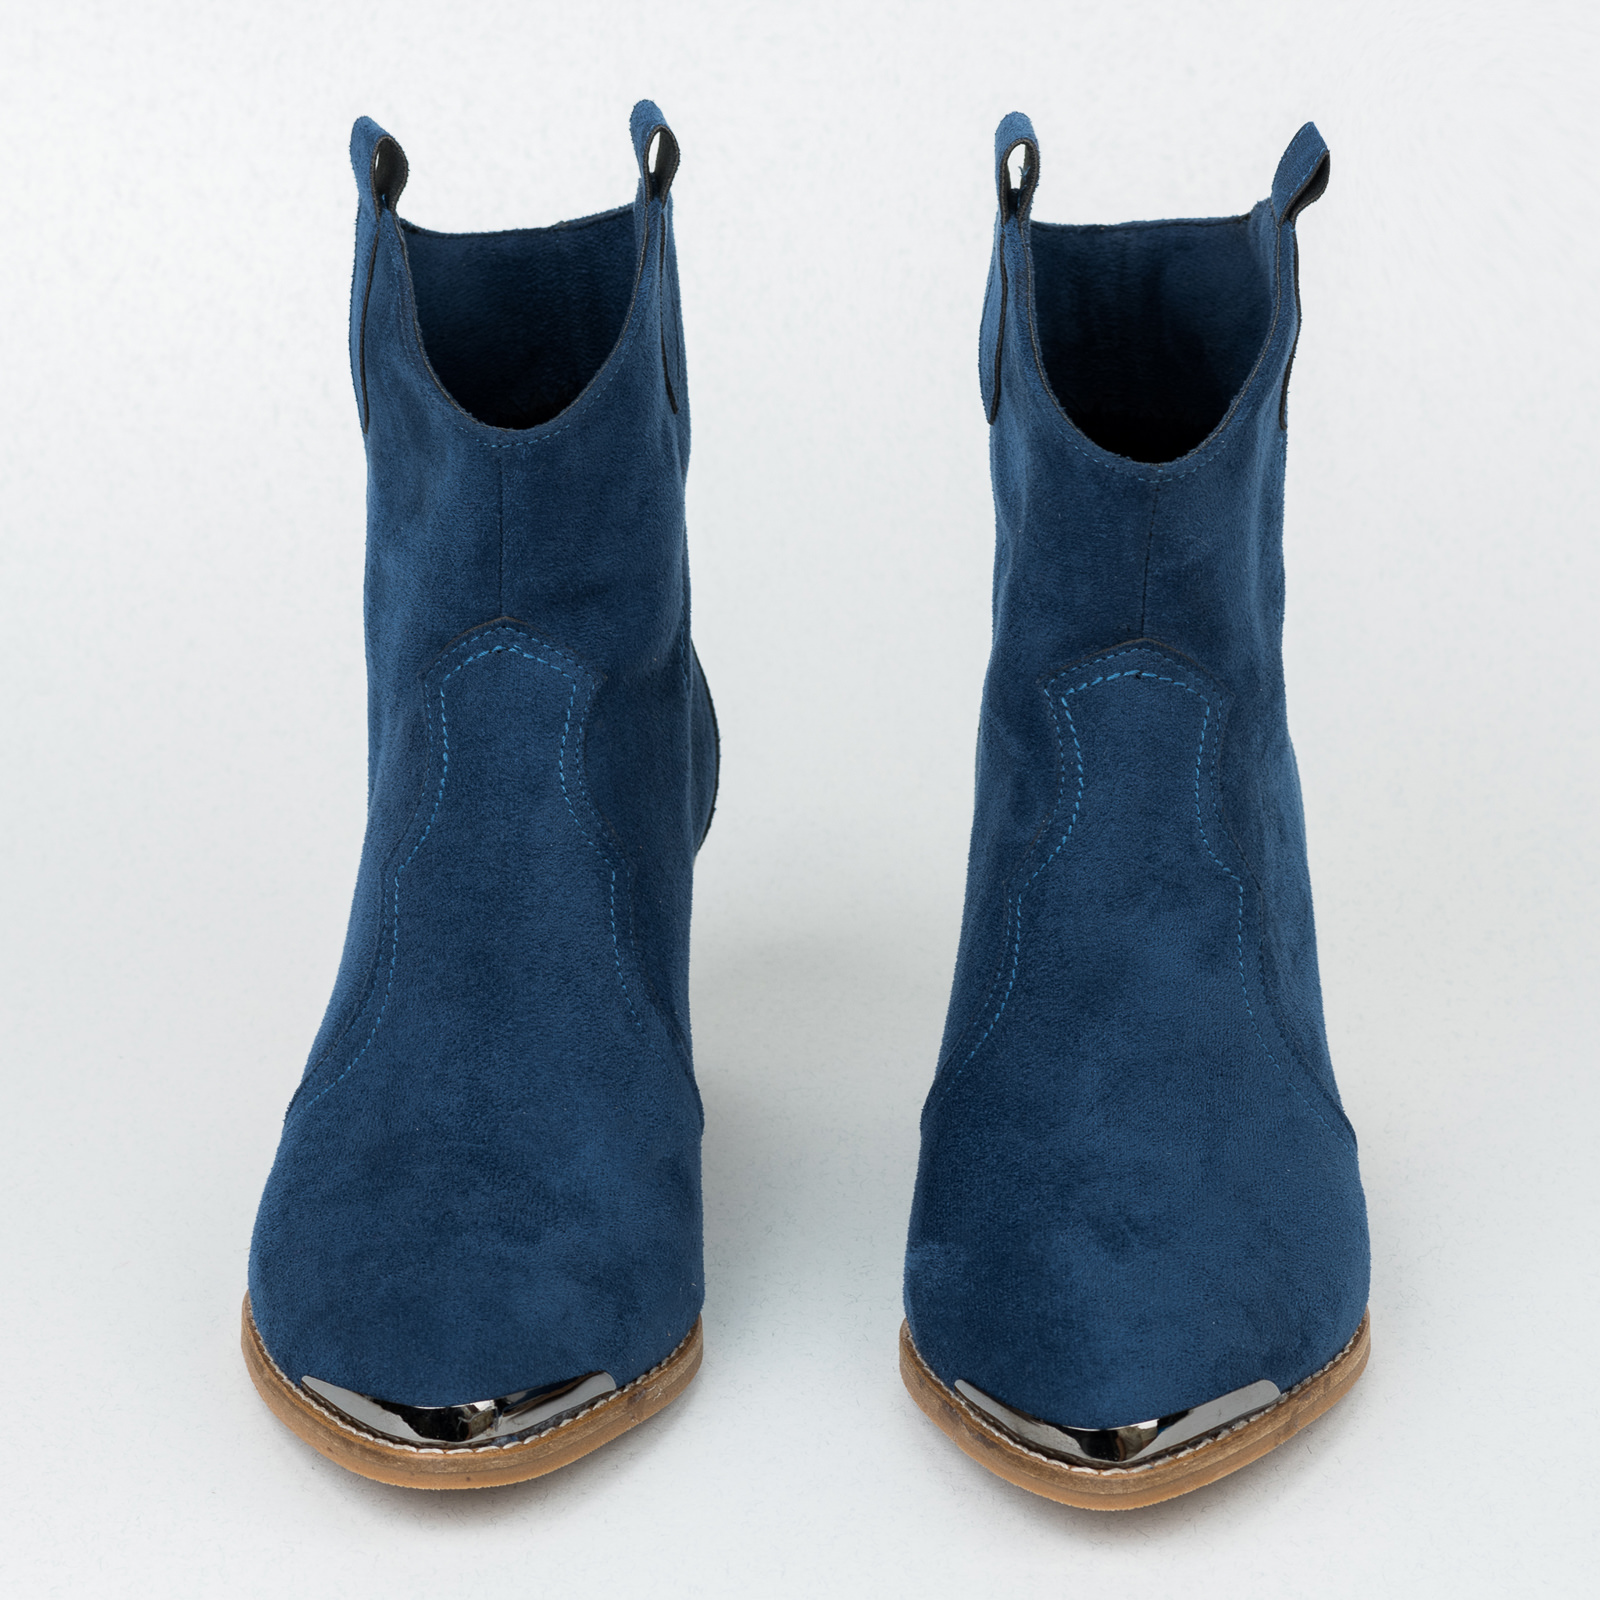 Women ankle boots B407 - NAVY